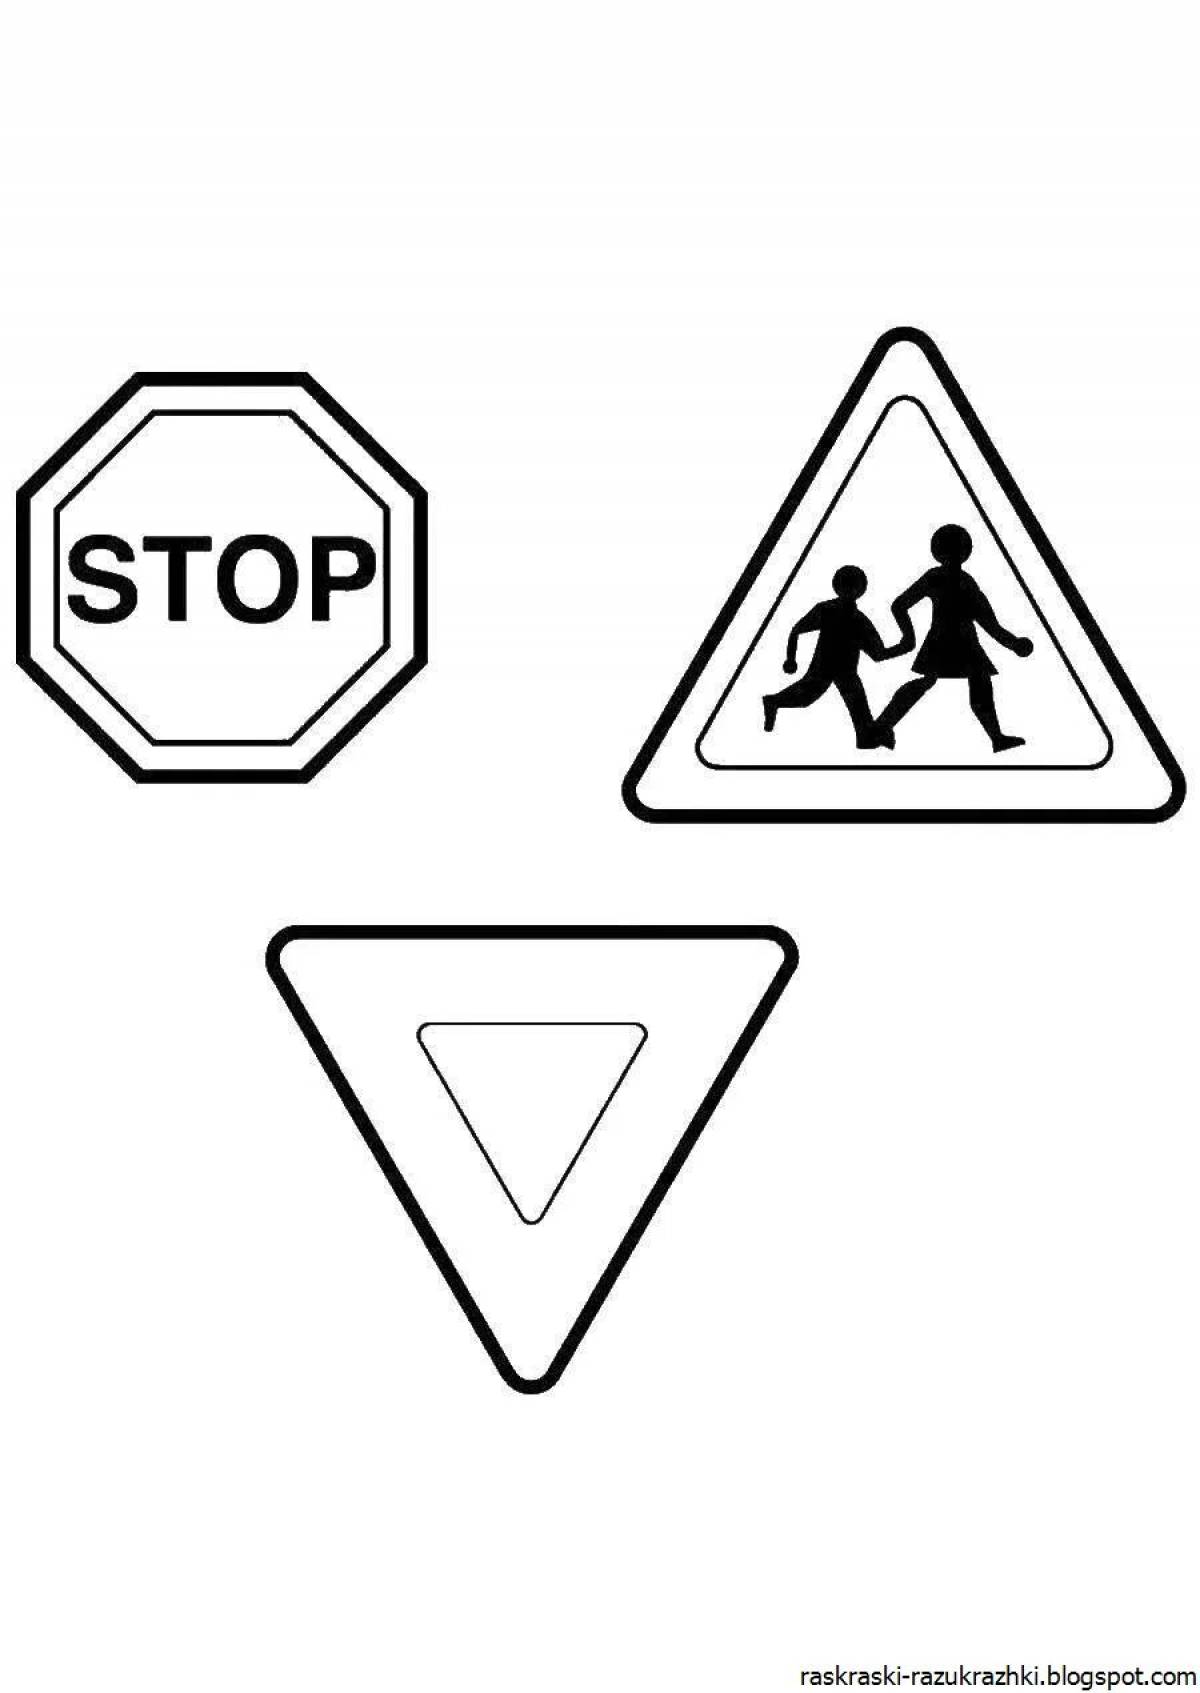 Creative traffic sign coloring book for kids